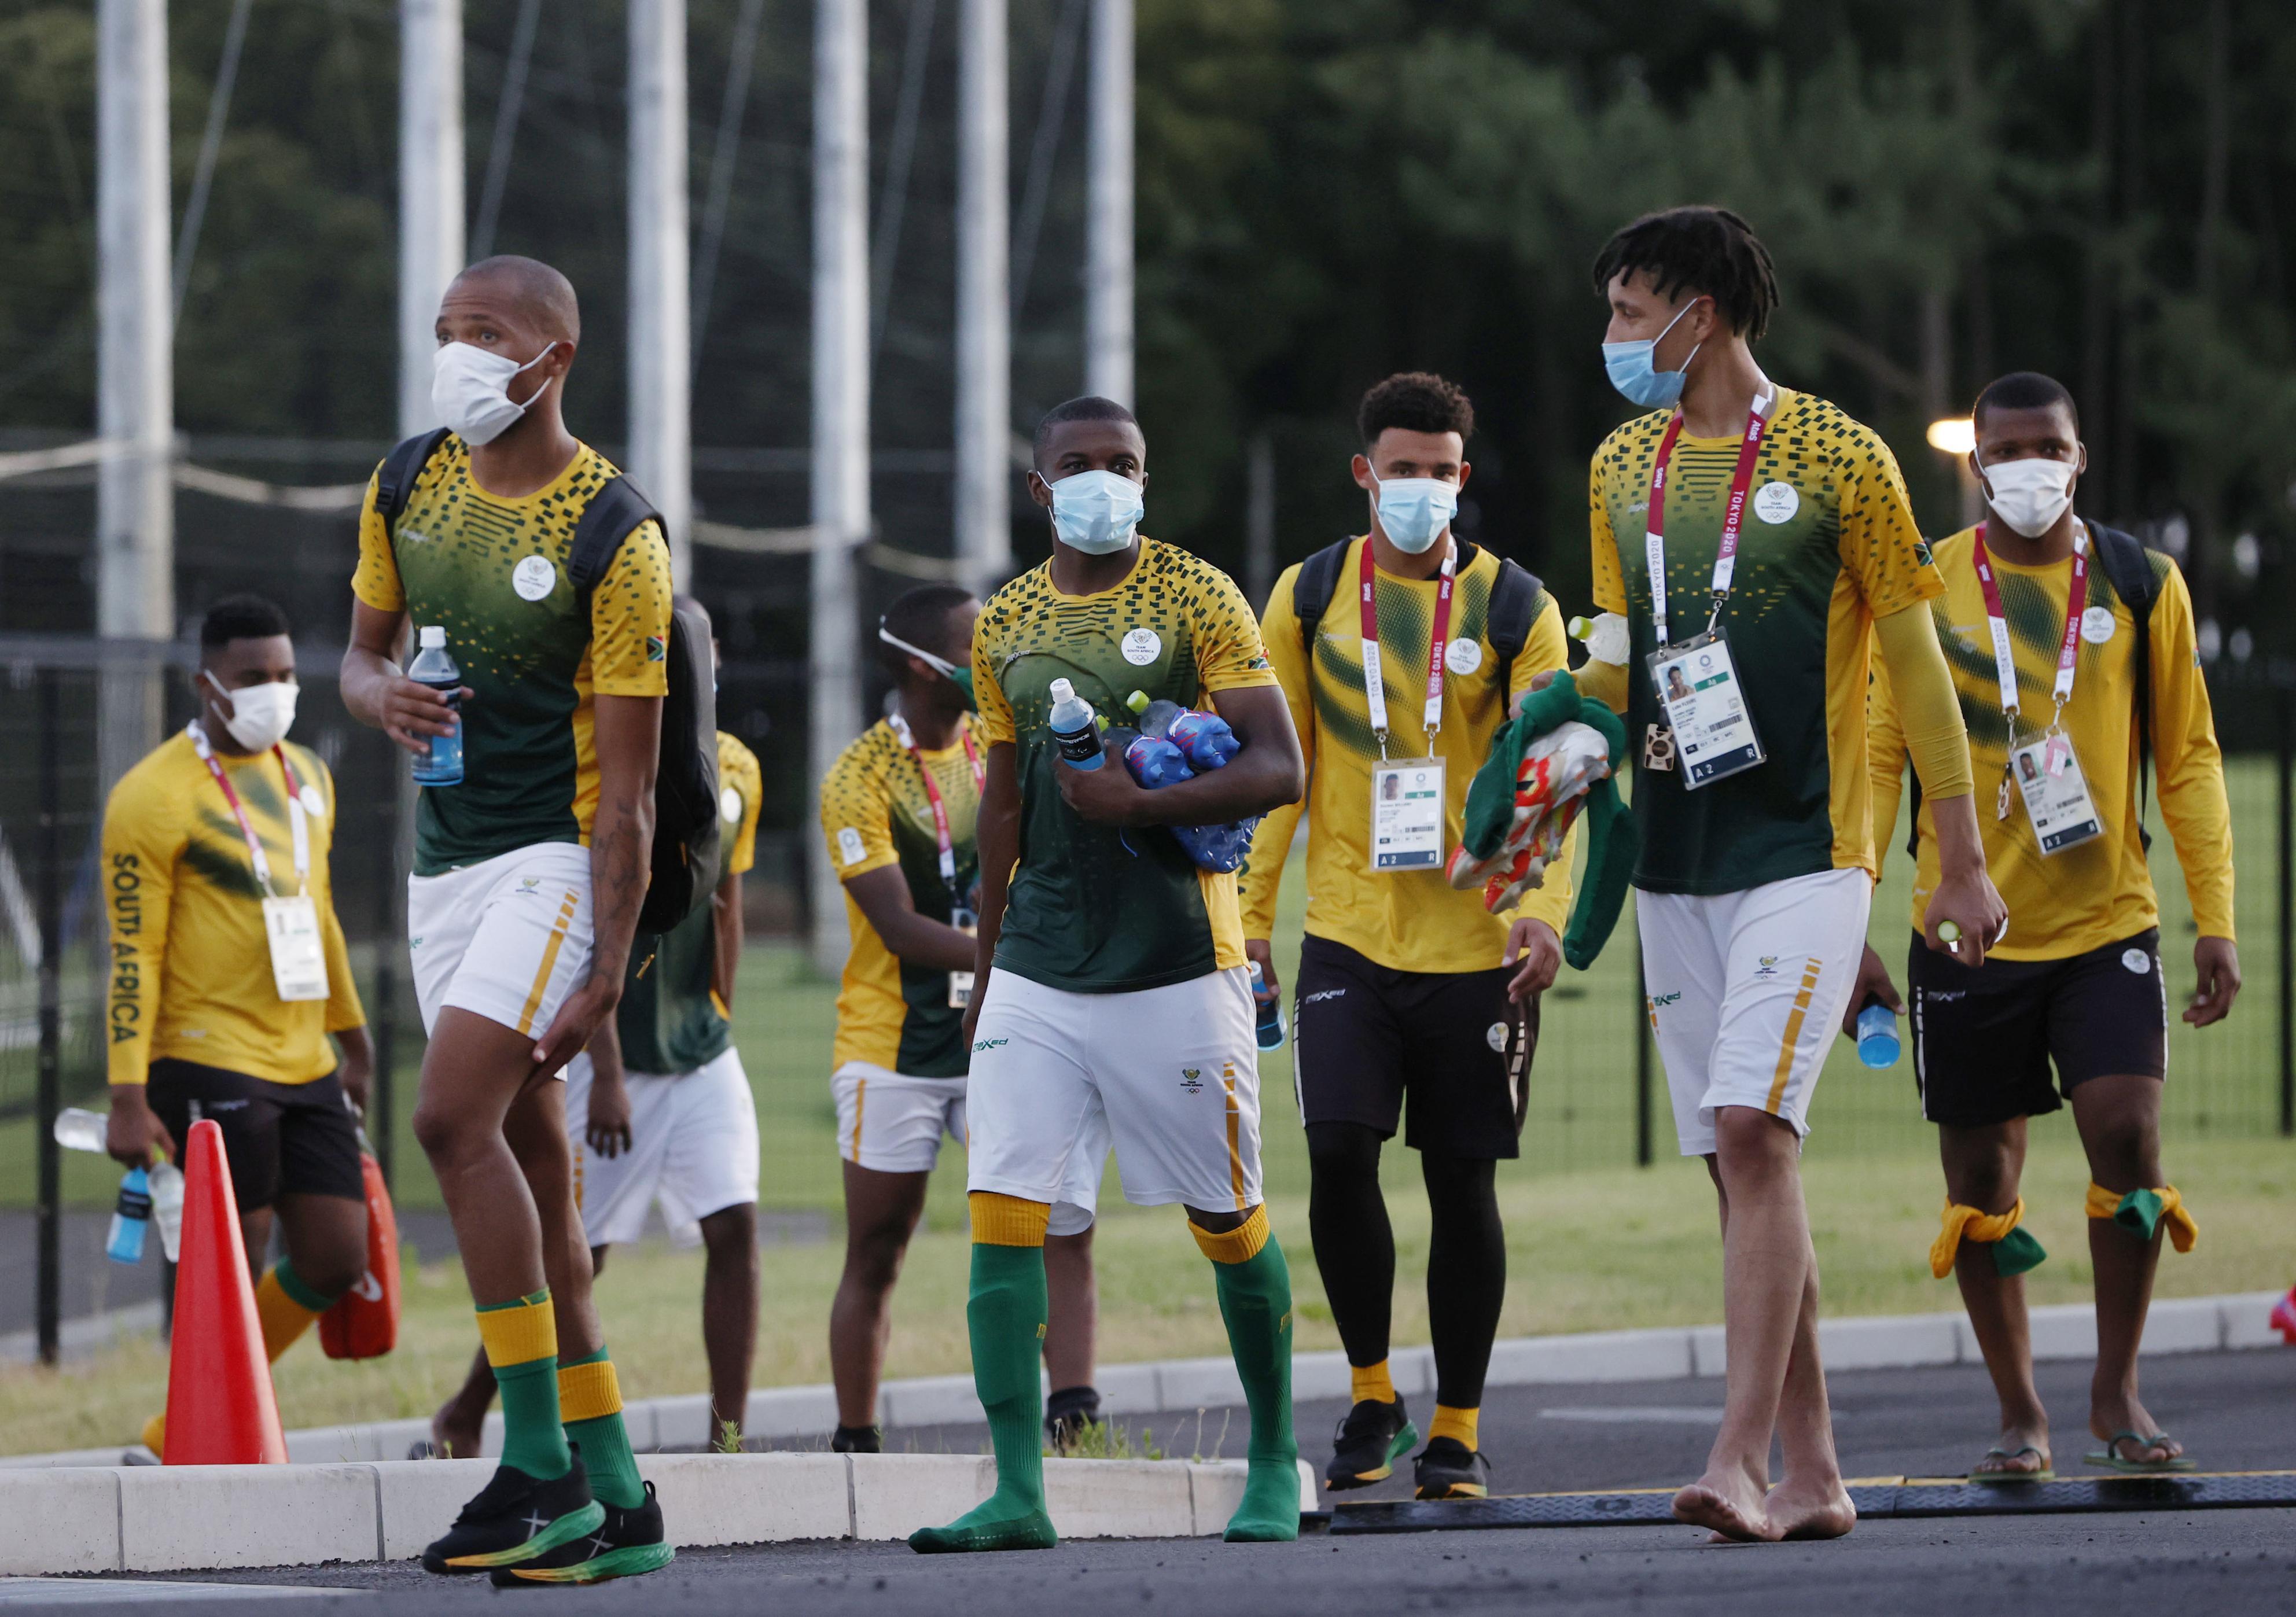 A group of men in South African soccer uniforms and face masks walk down a street near a pitch 